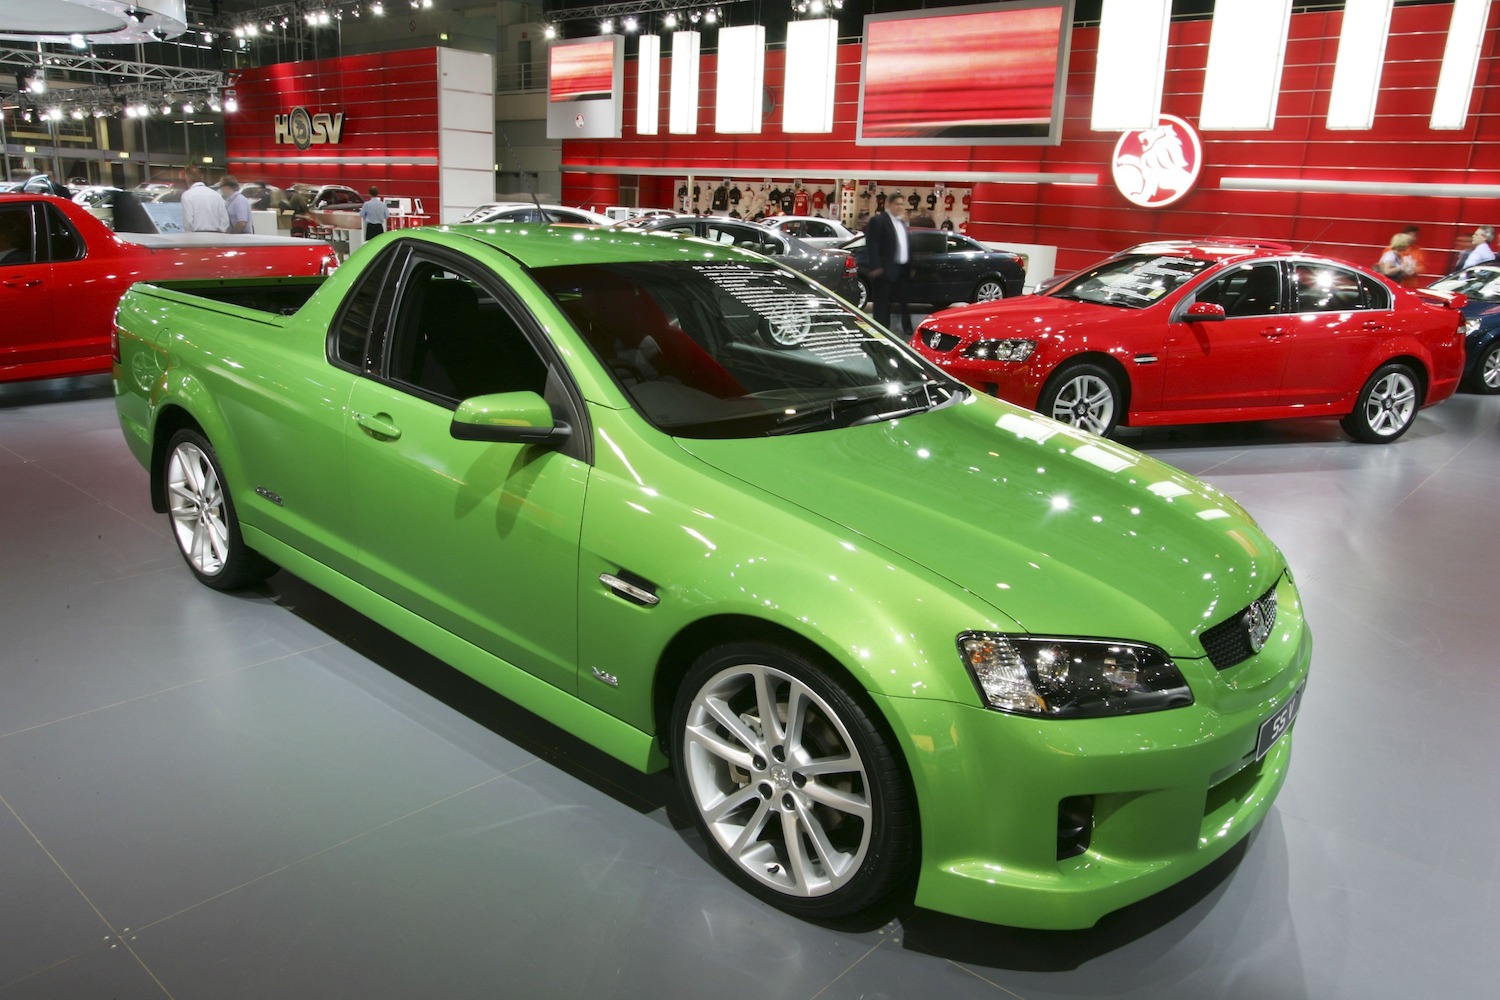 Bright green special edition of Holden's Ute compact coupe utility pickup truck parked at the Australian auto show.